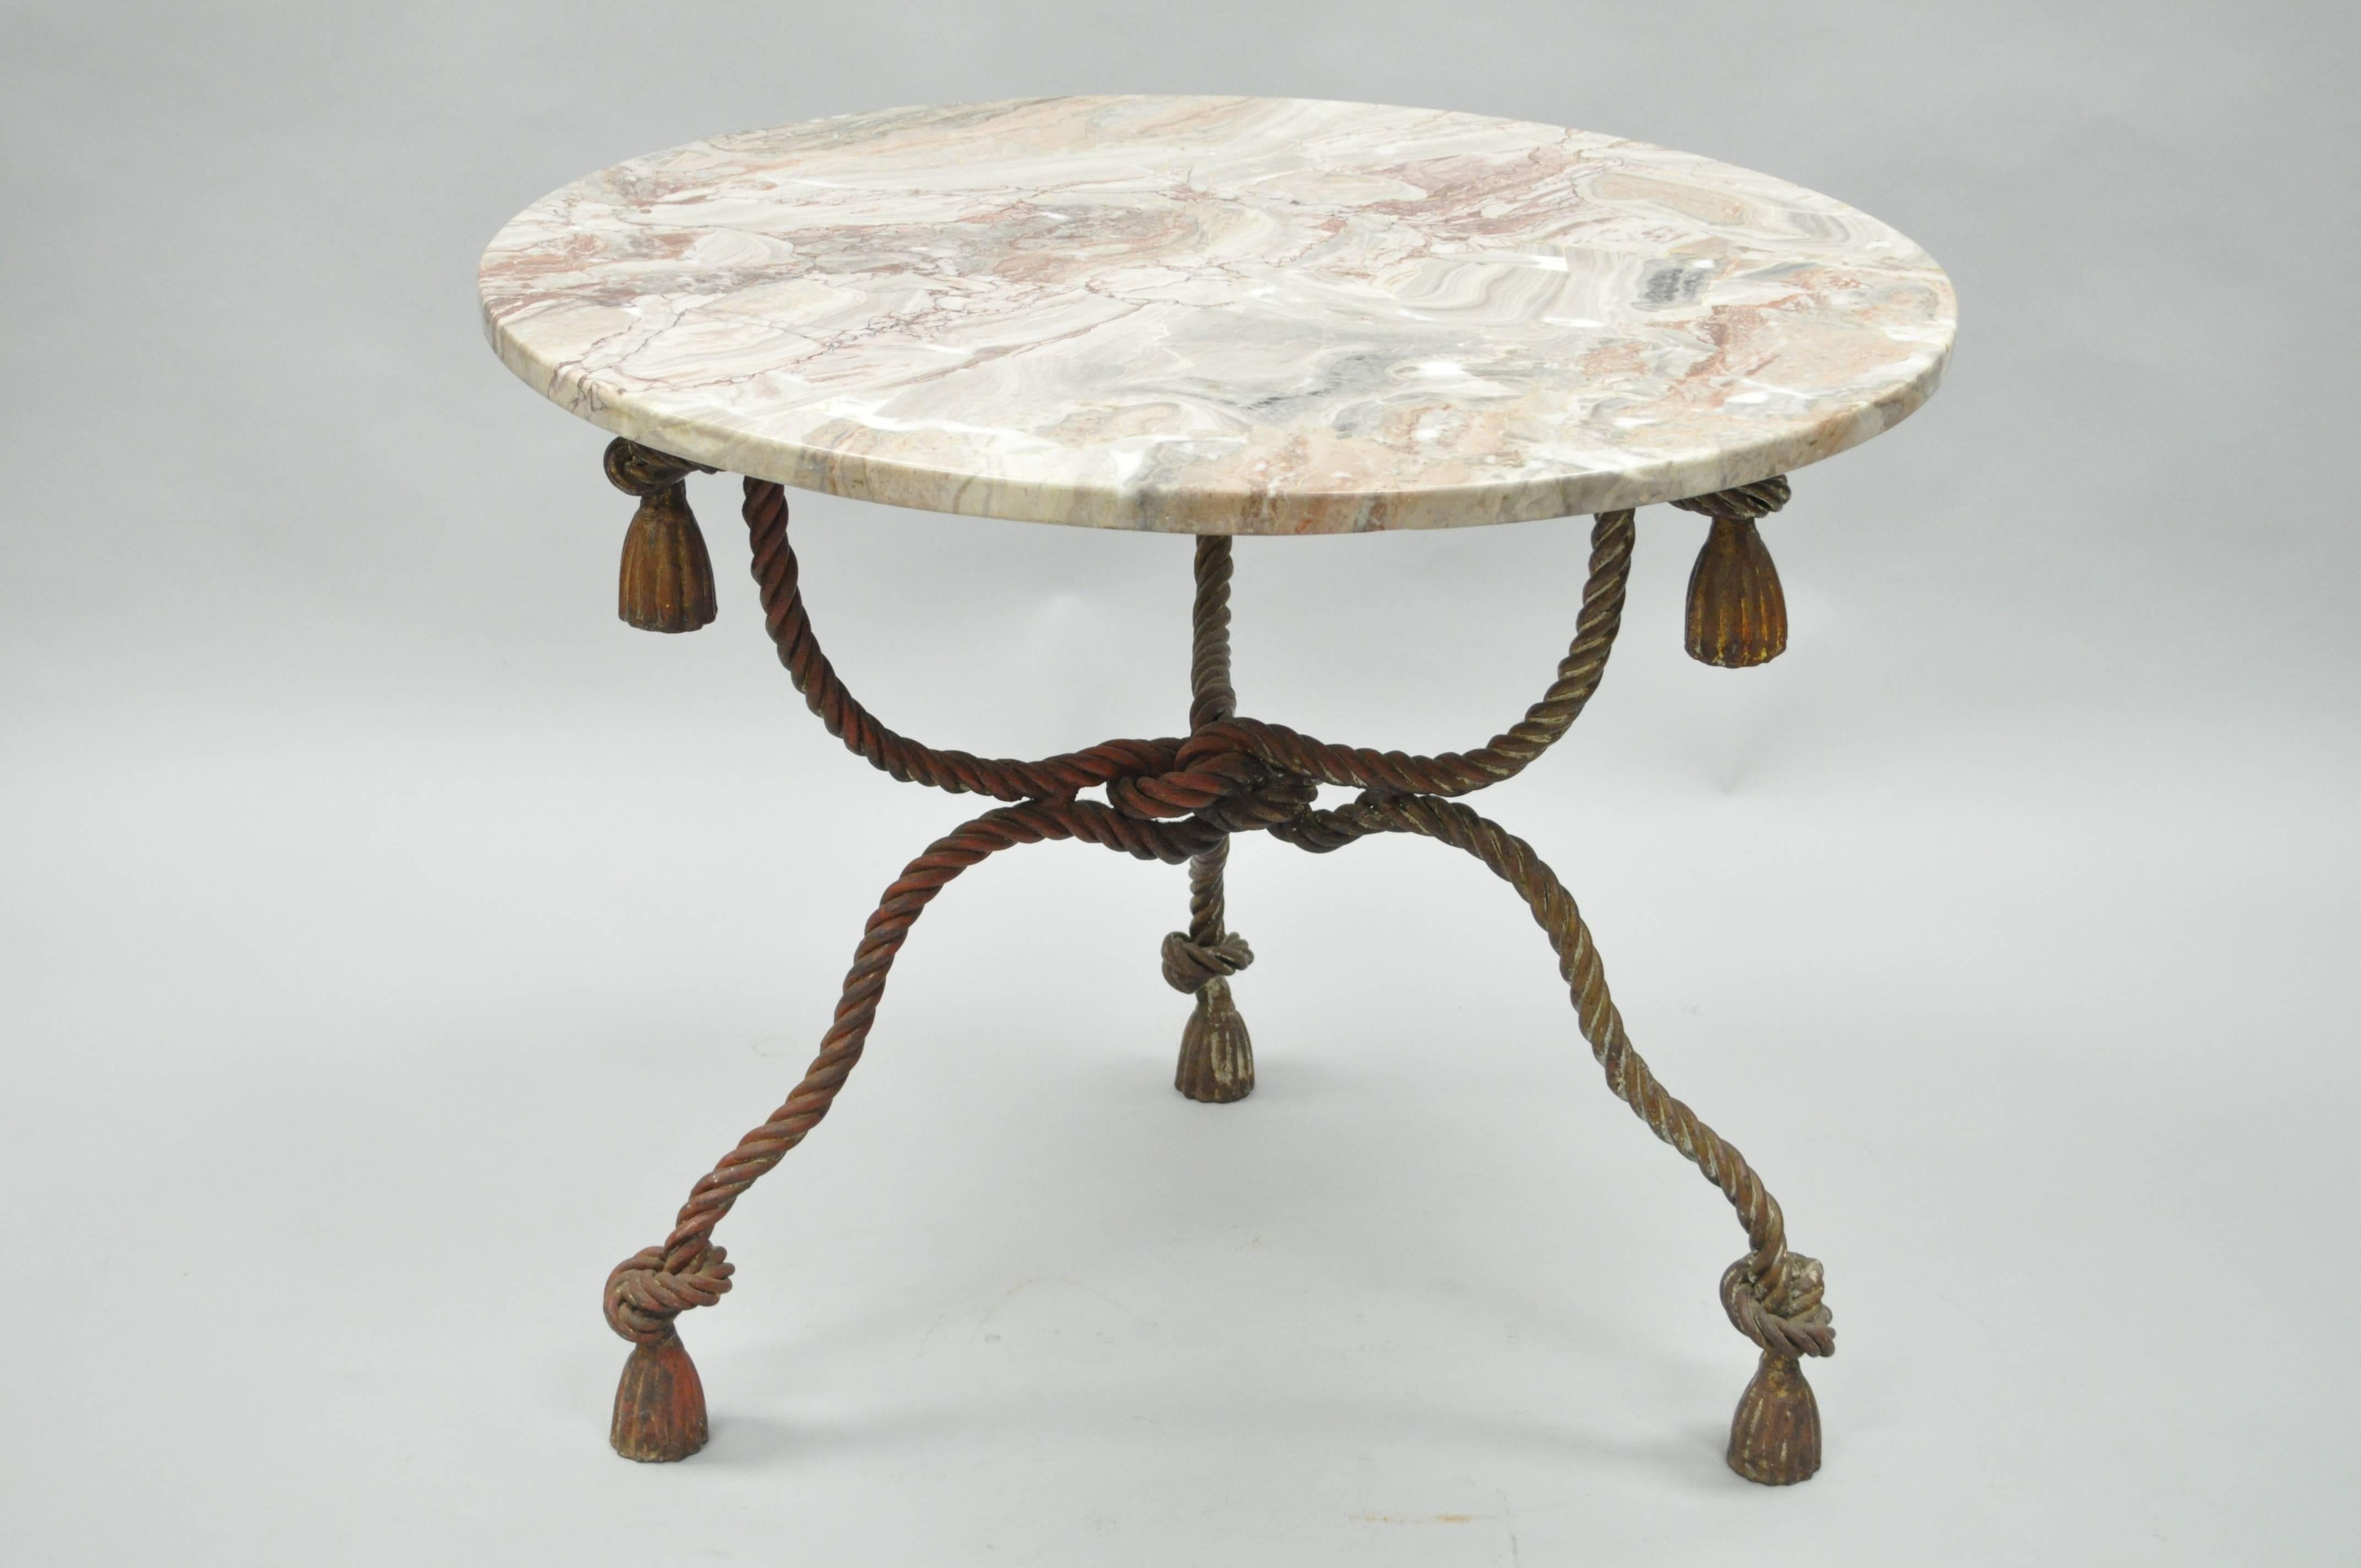 1940s Italian Marble-Top Rope Turned Round Tassel Form Iron Center Table 4